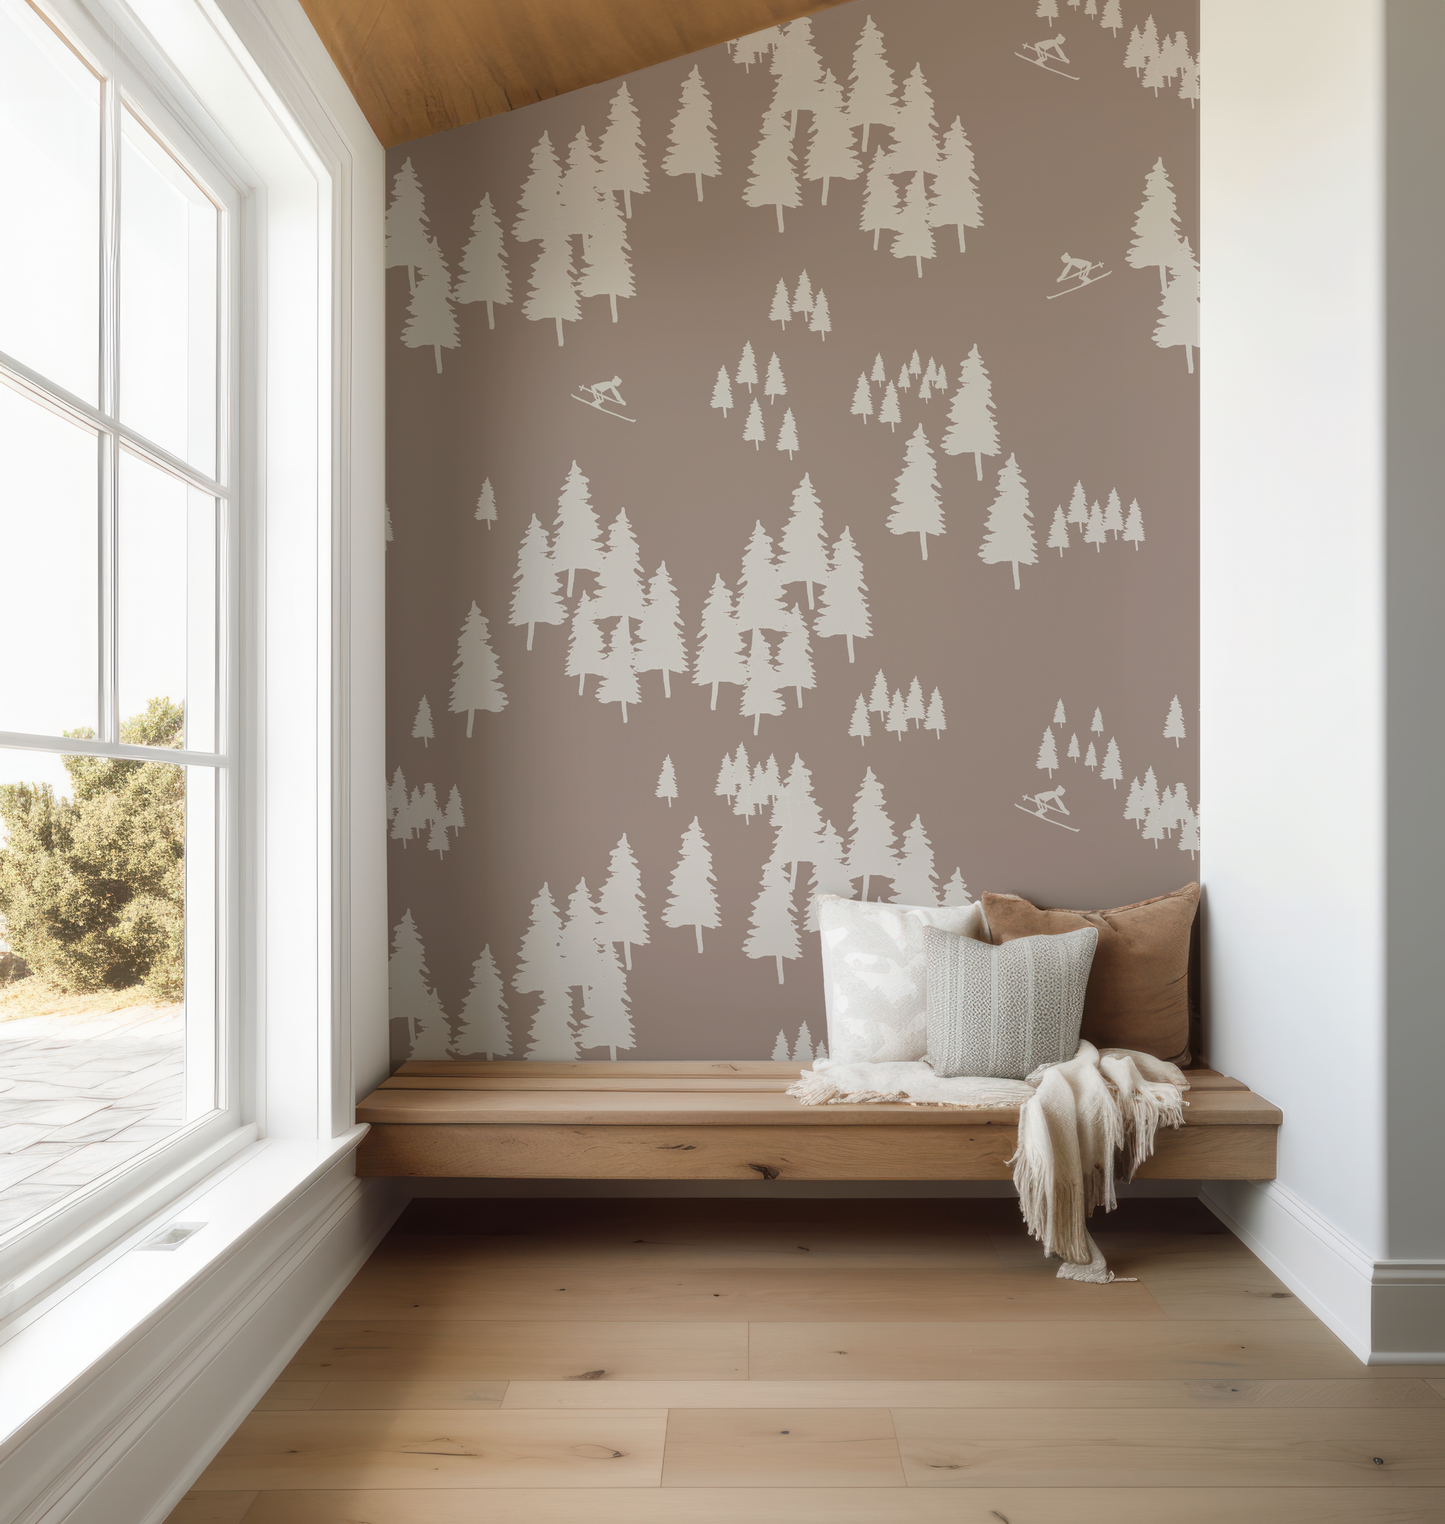 Skiing Through the Trees Wallpaper Mural